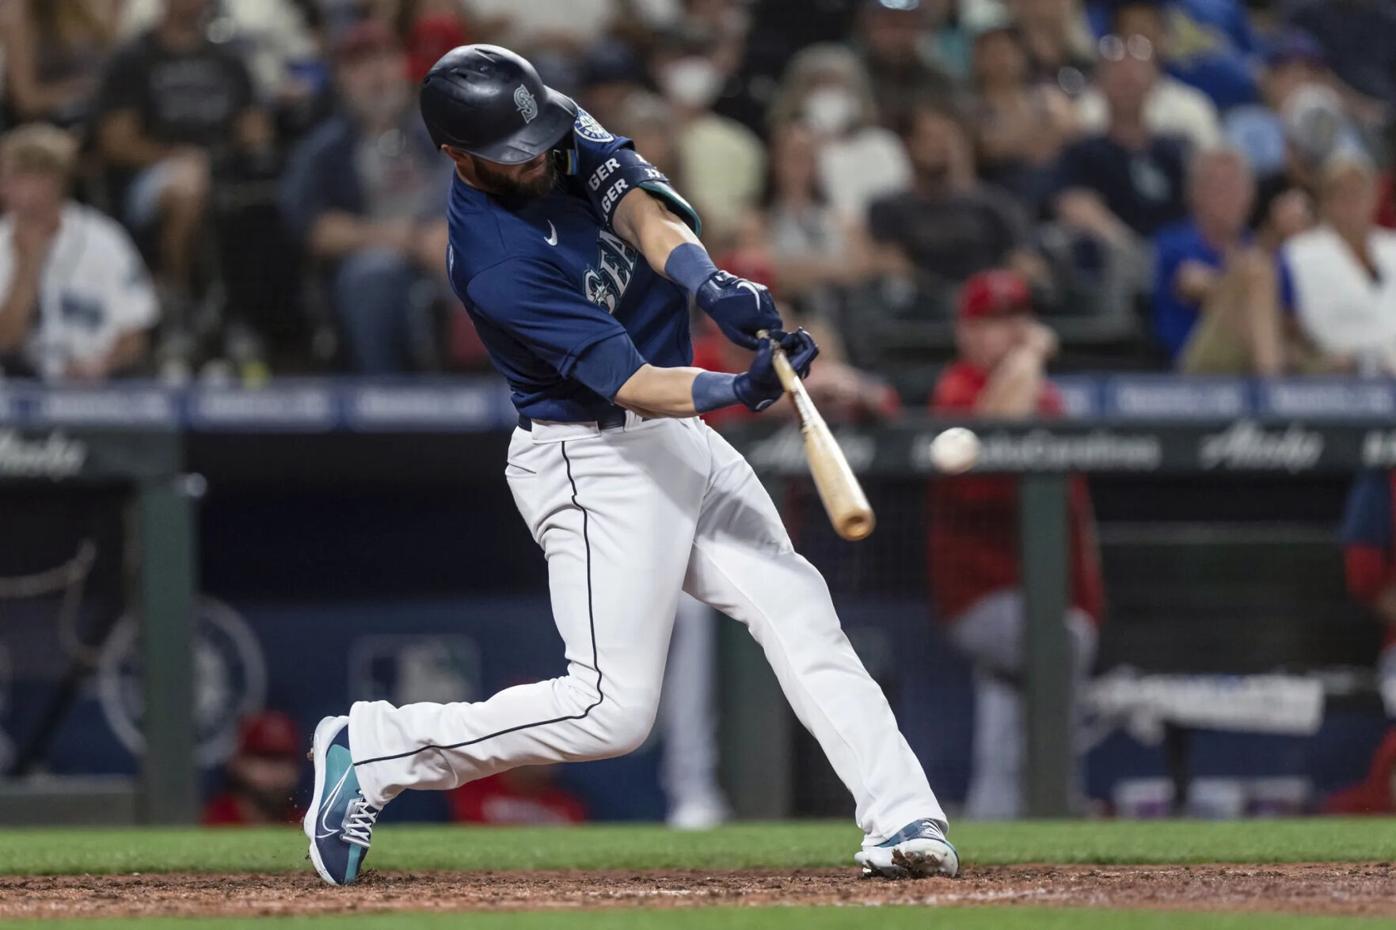 Mitch Haniger is back, Julio Rodriguez getting closer for Mariners, Mariners